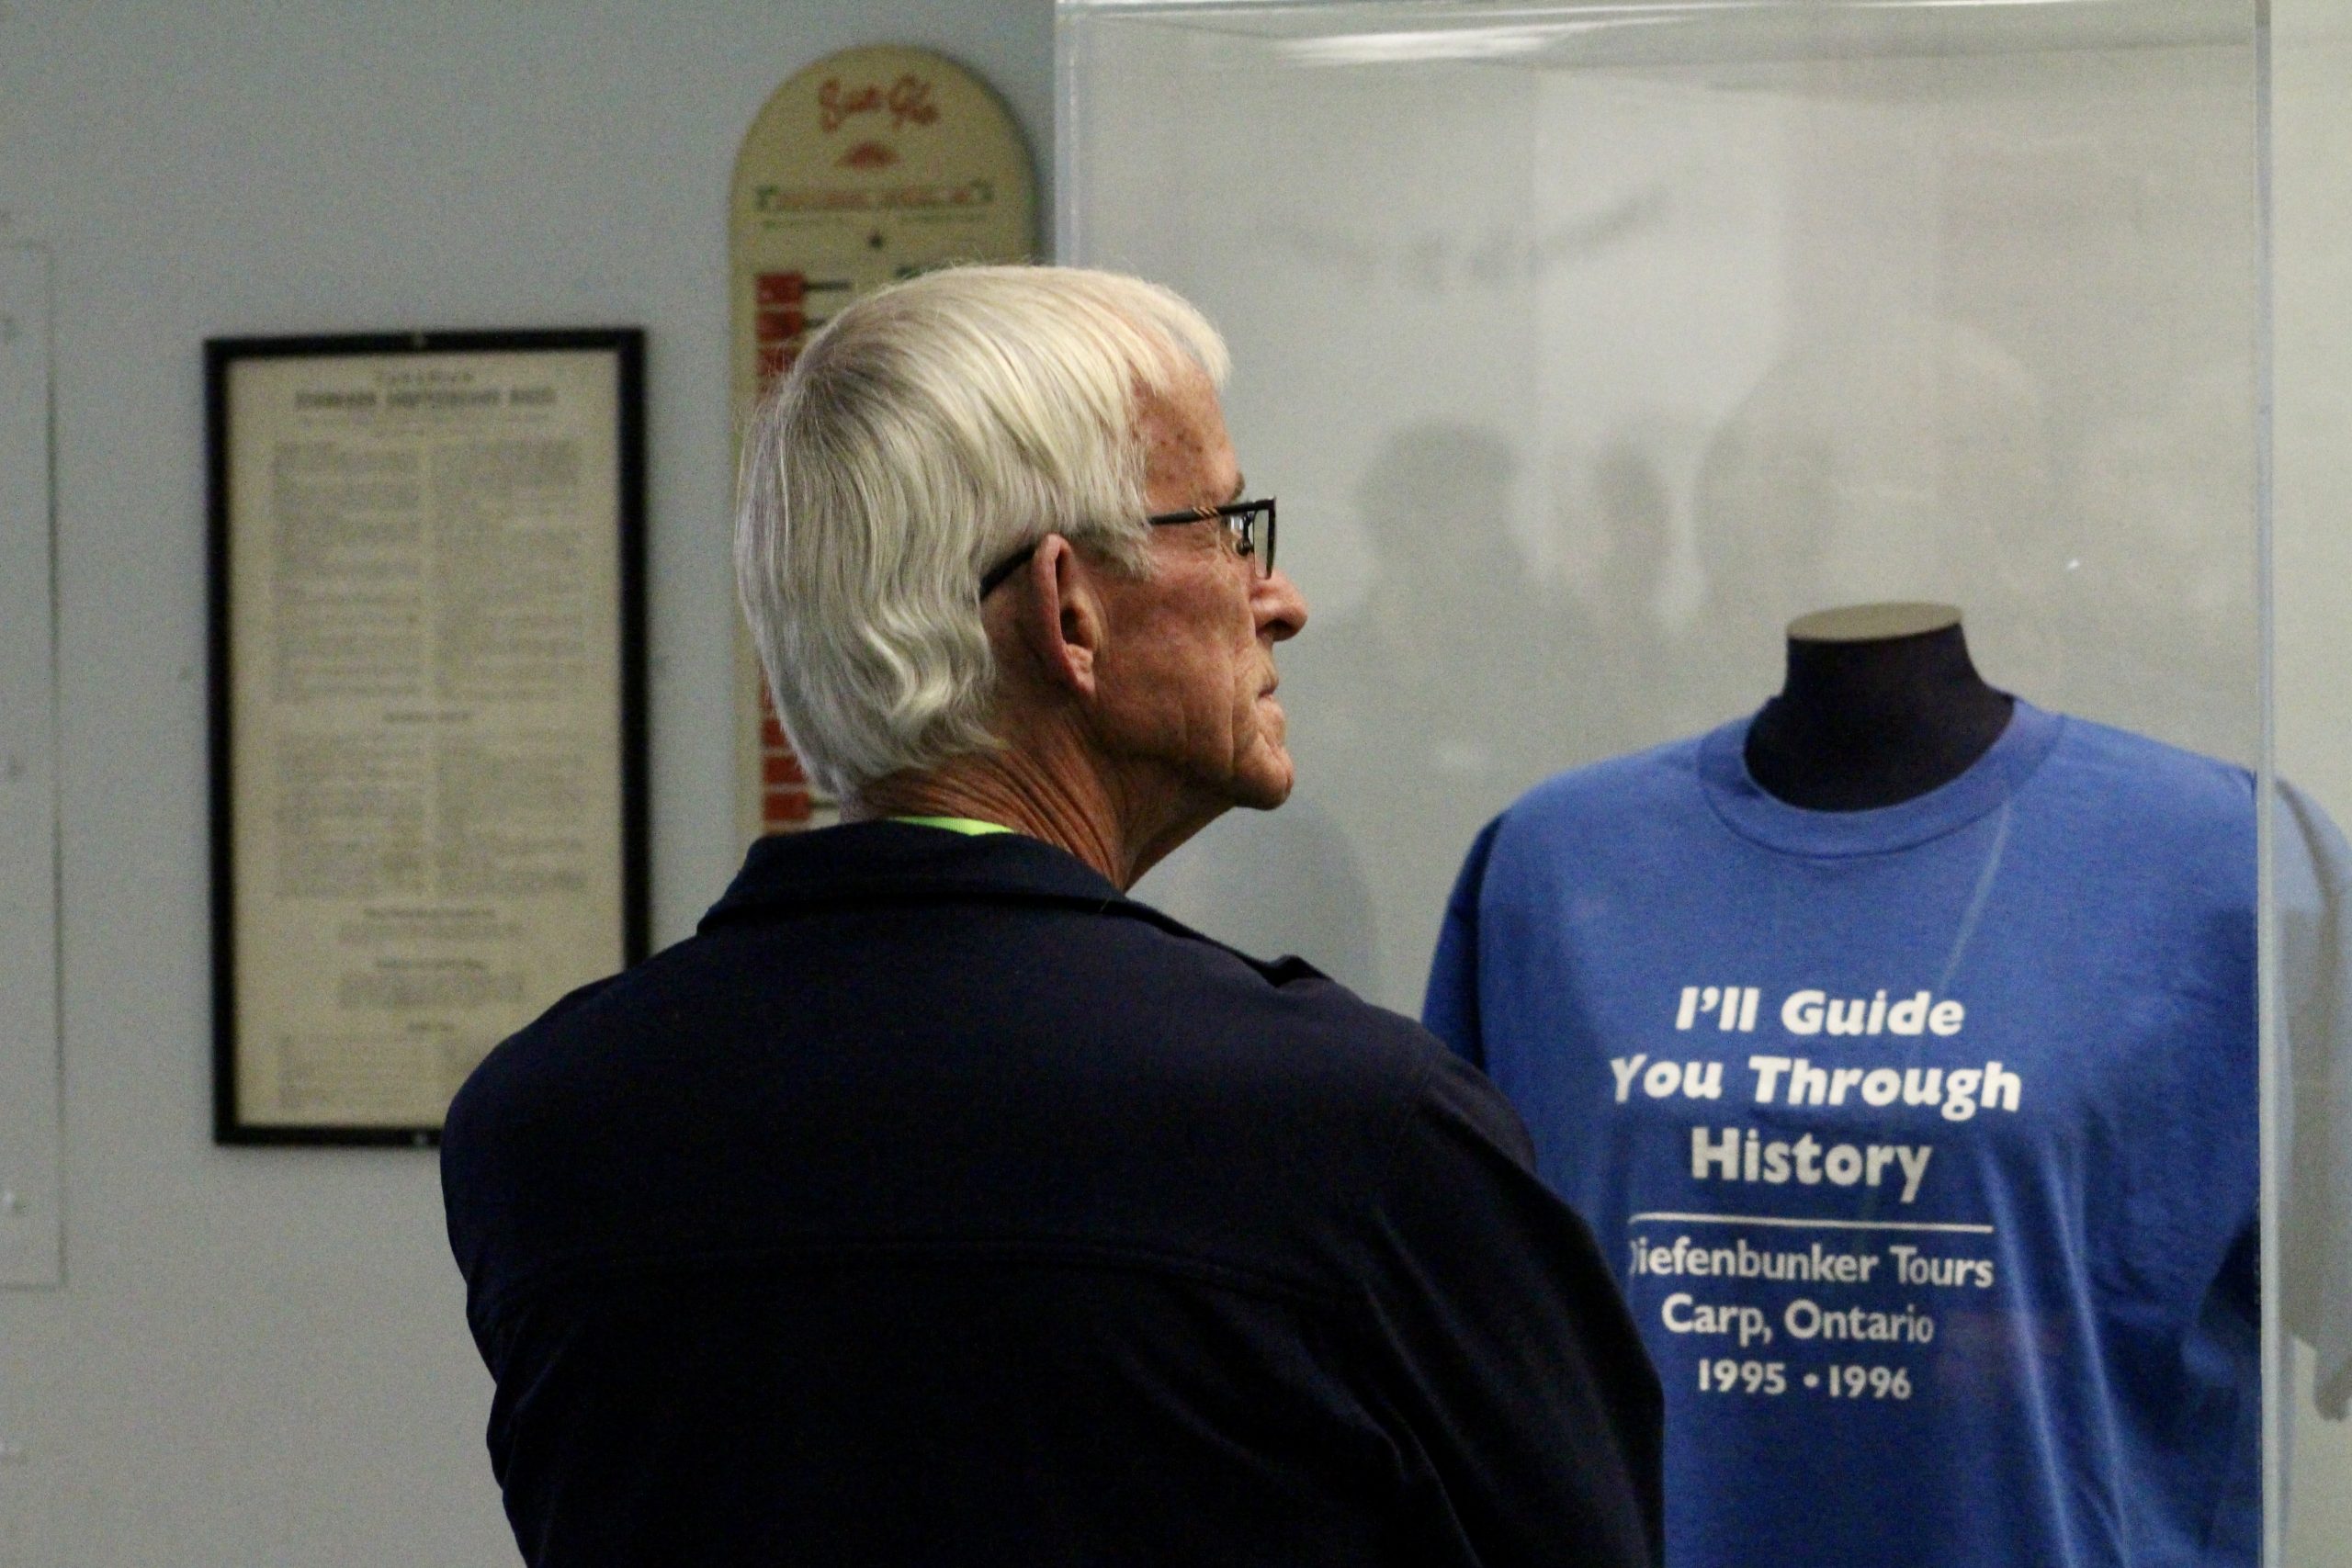 Diefenbunker supporter examines a case that displays an original Diefenbunker guide t-shirt.